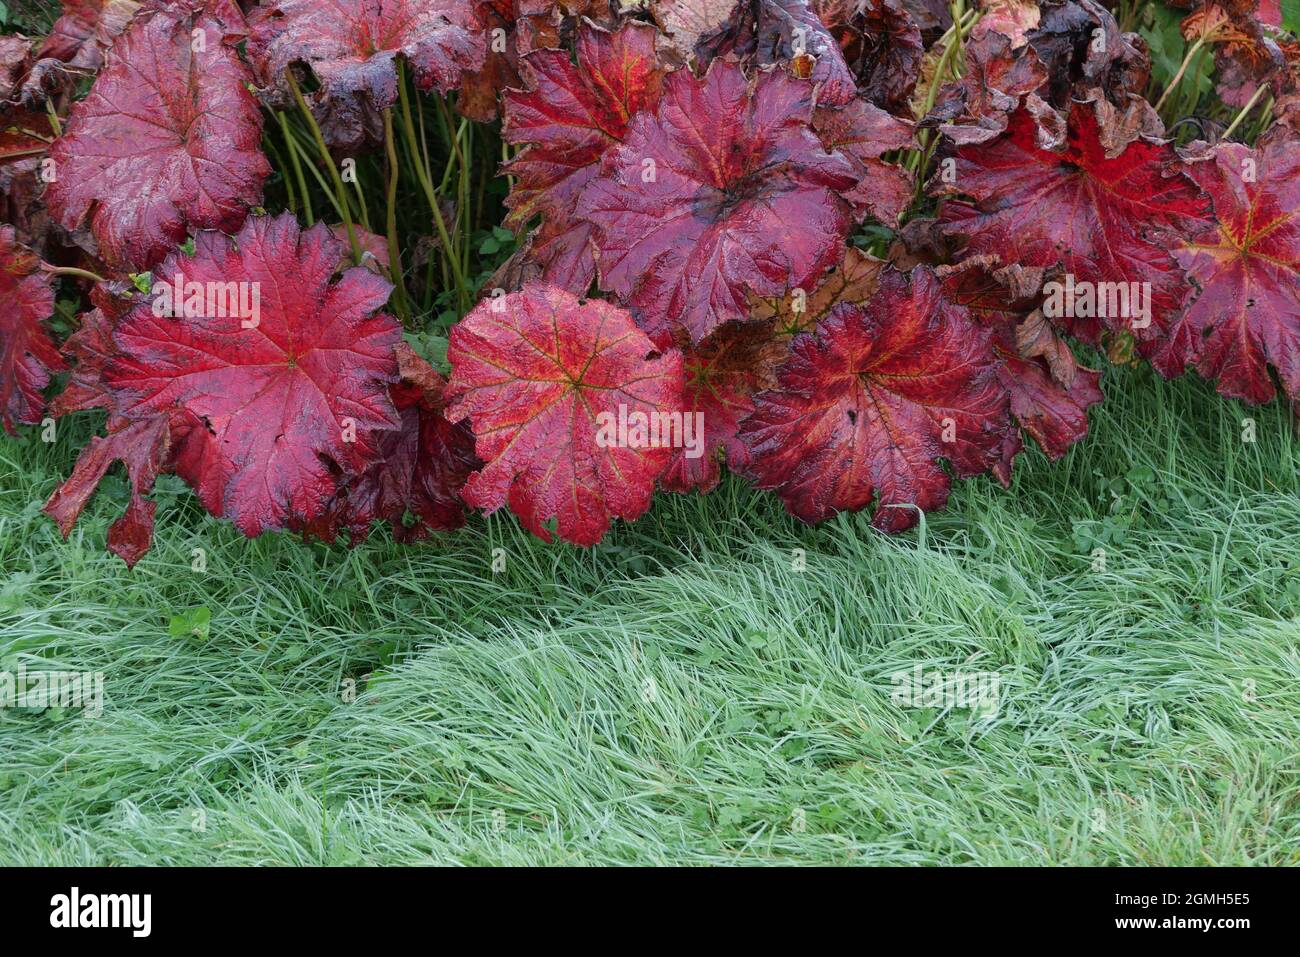 Gunnera manicata in autumn with red foliage above long grass Stock Photo